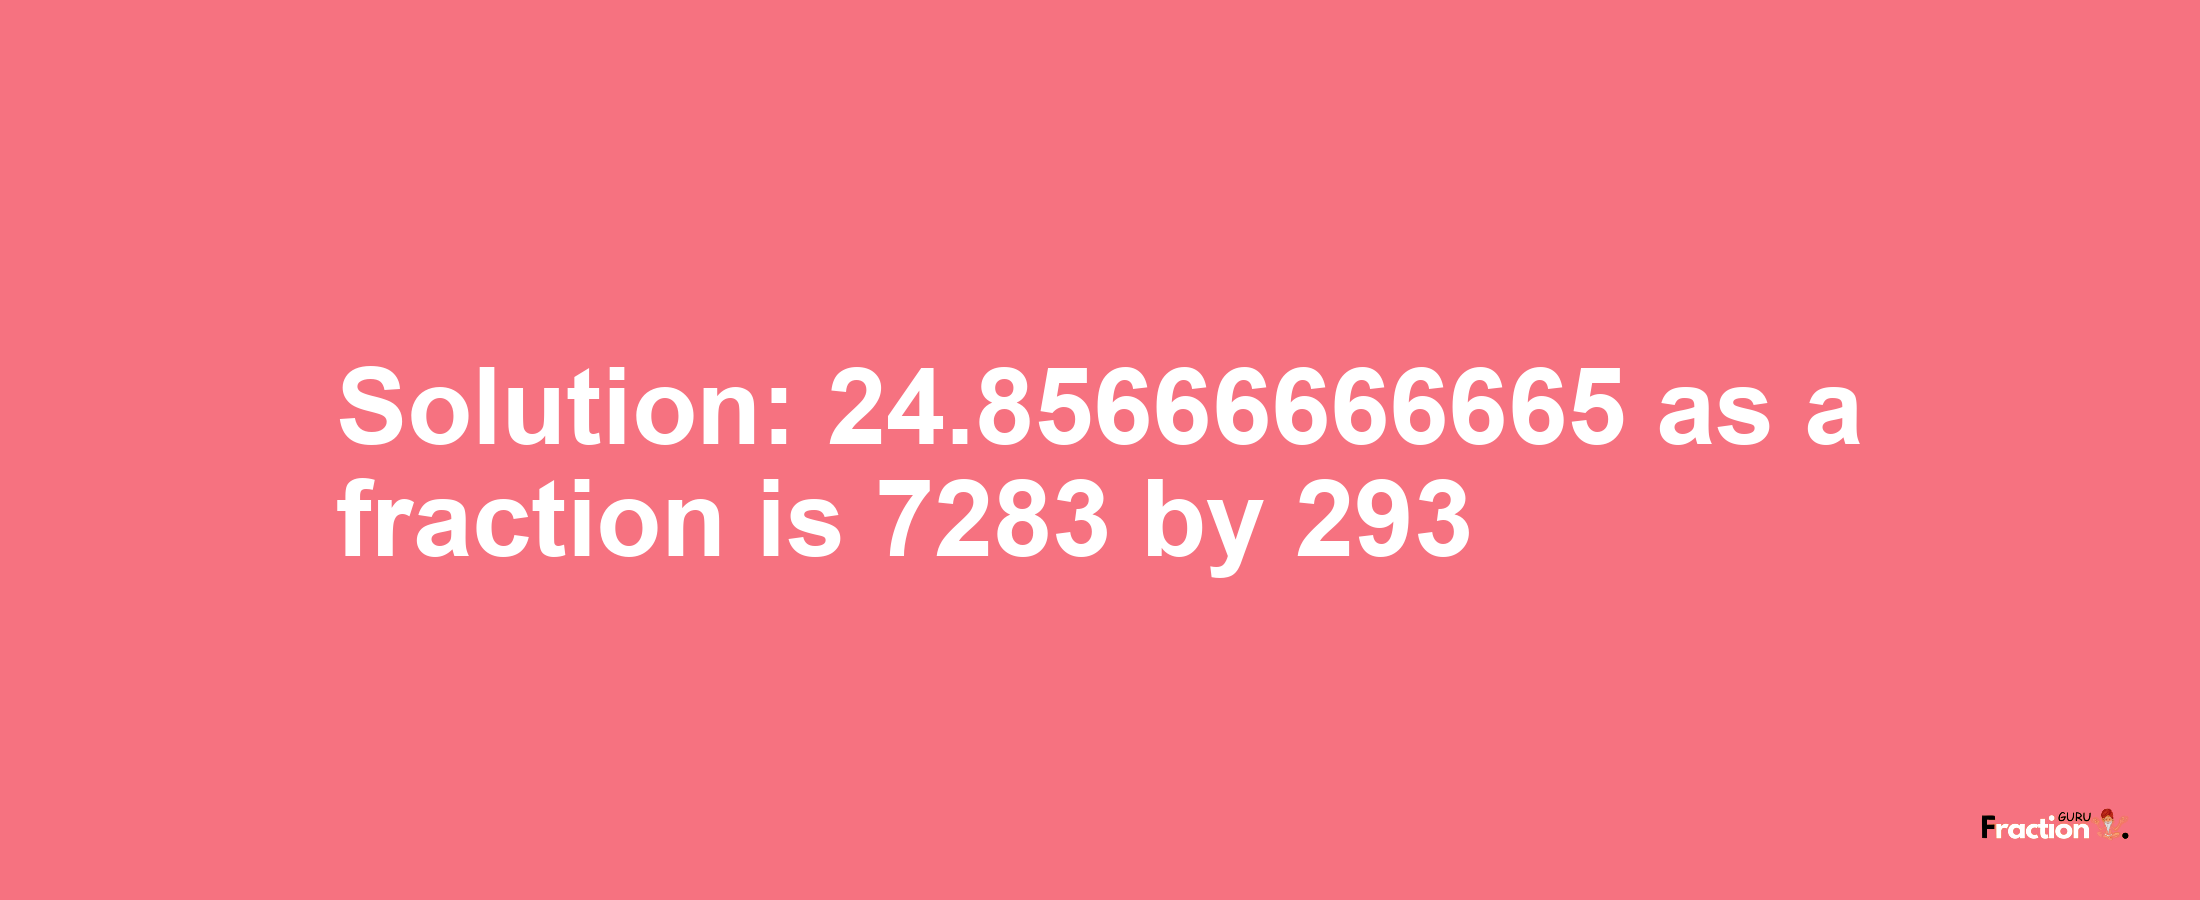 Solution:24.85666666665 as a fraction is 7283/293